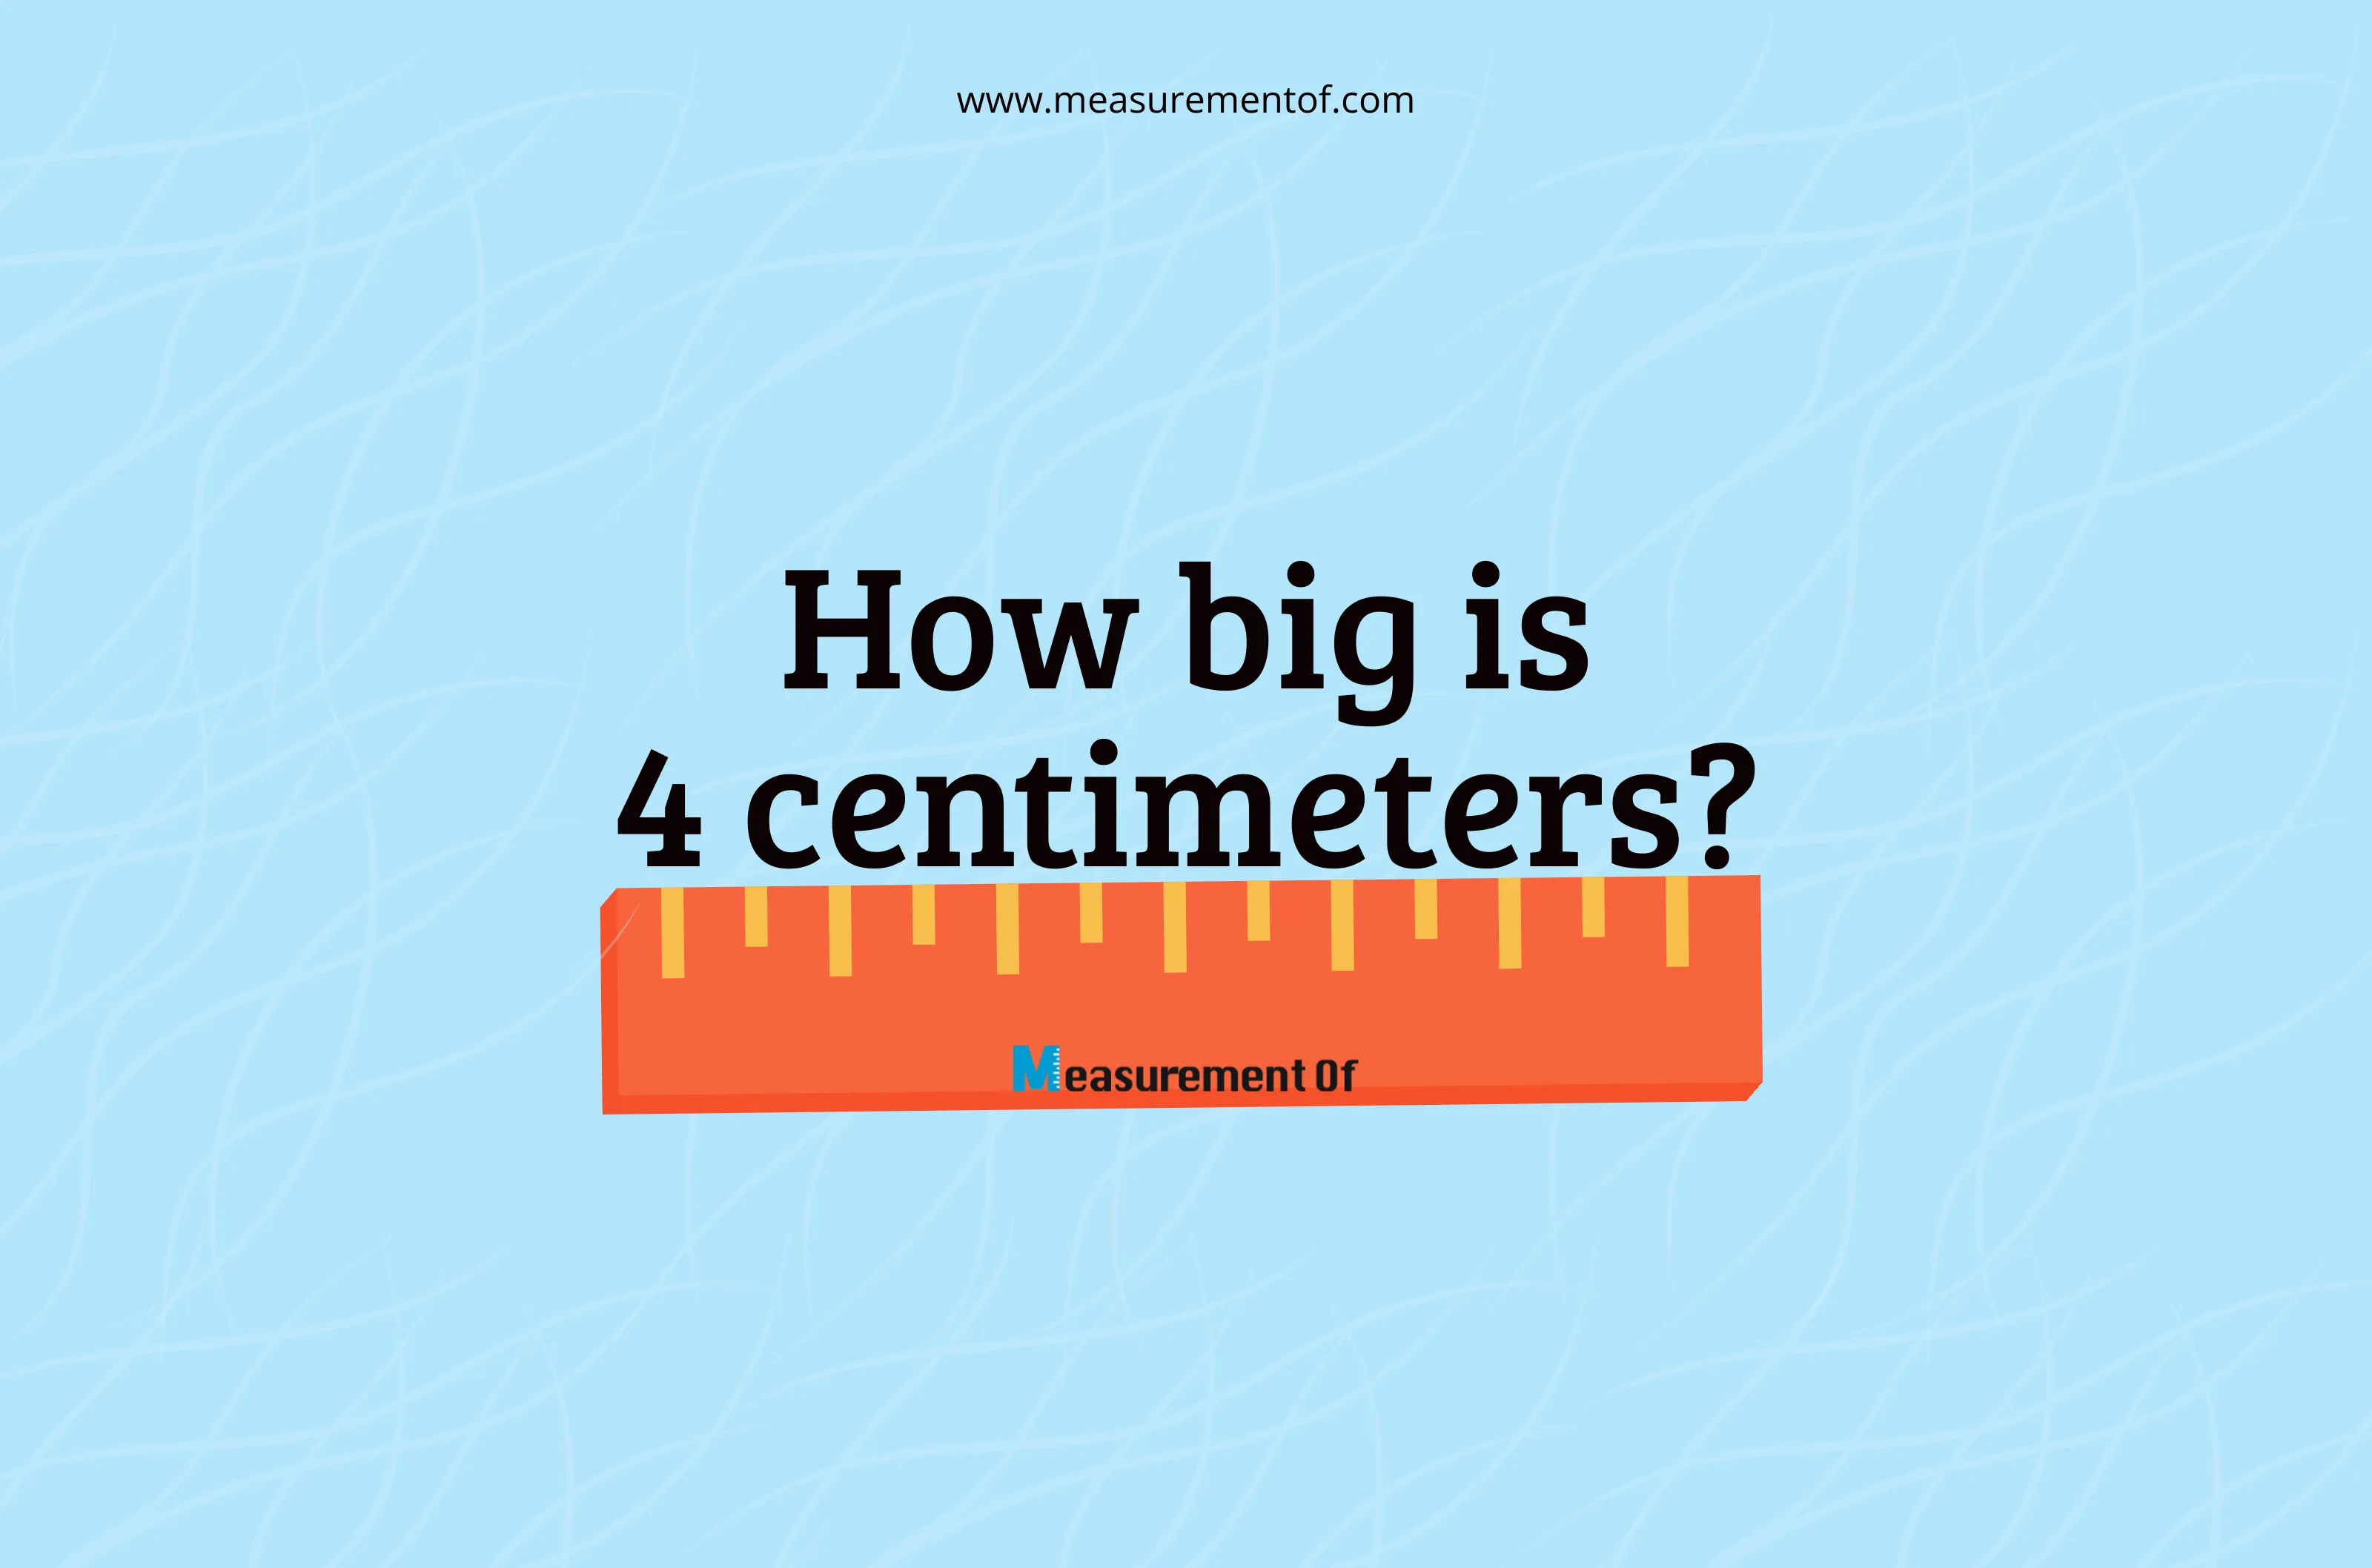 How Big Is 4 Centimeters Compared To Common Objects